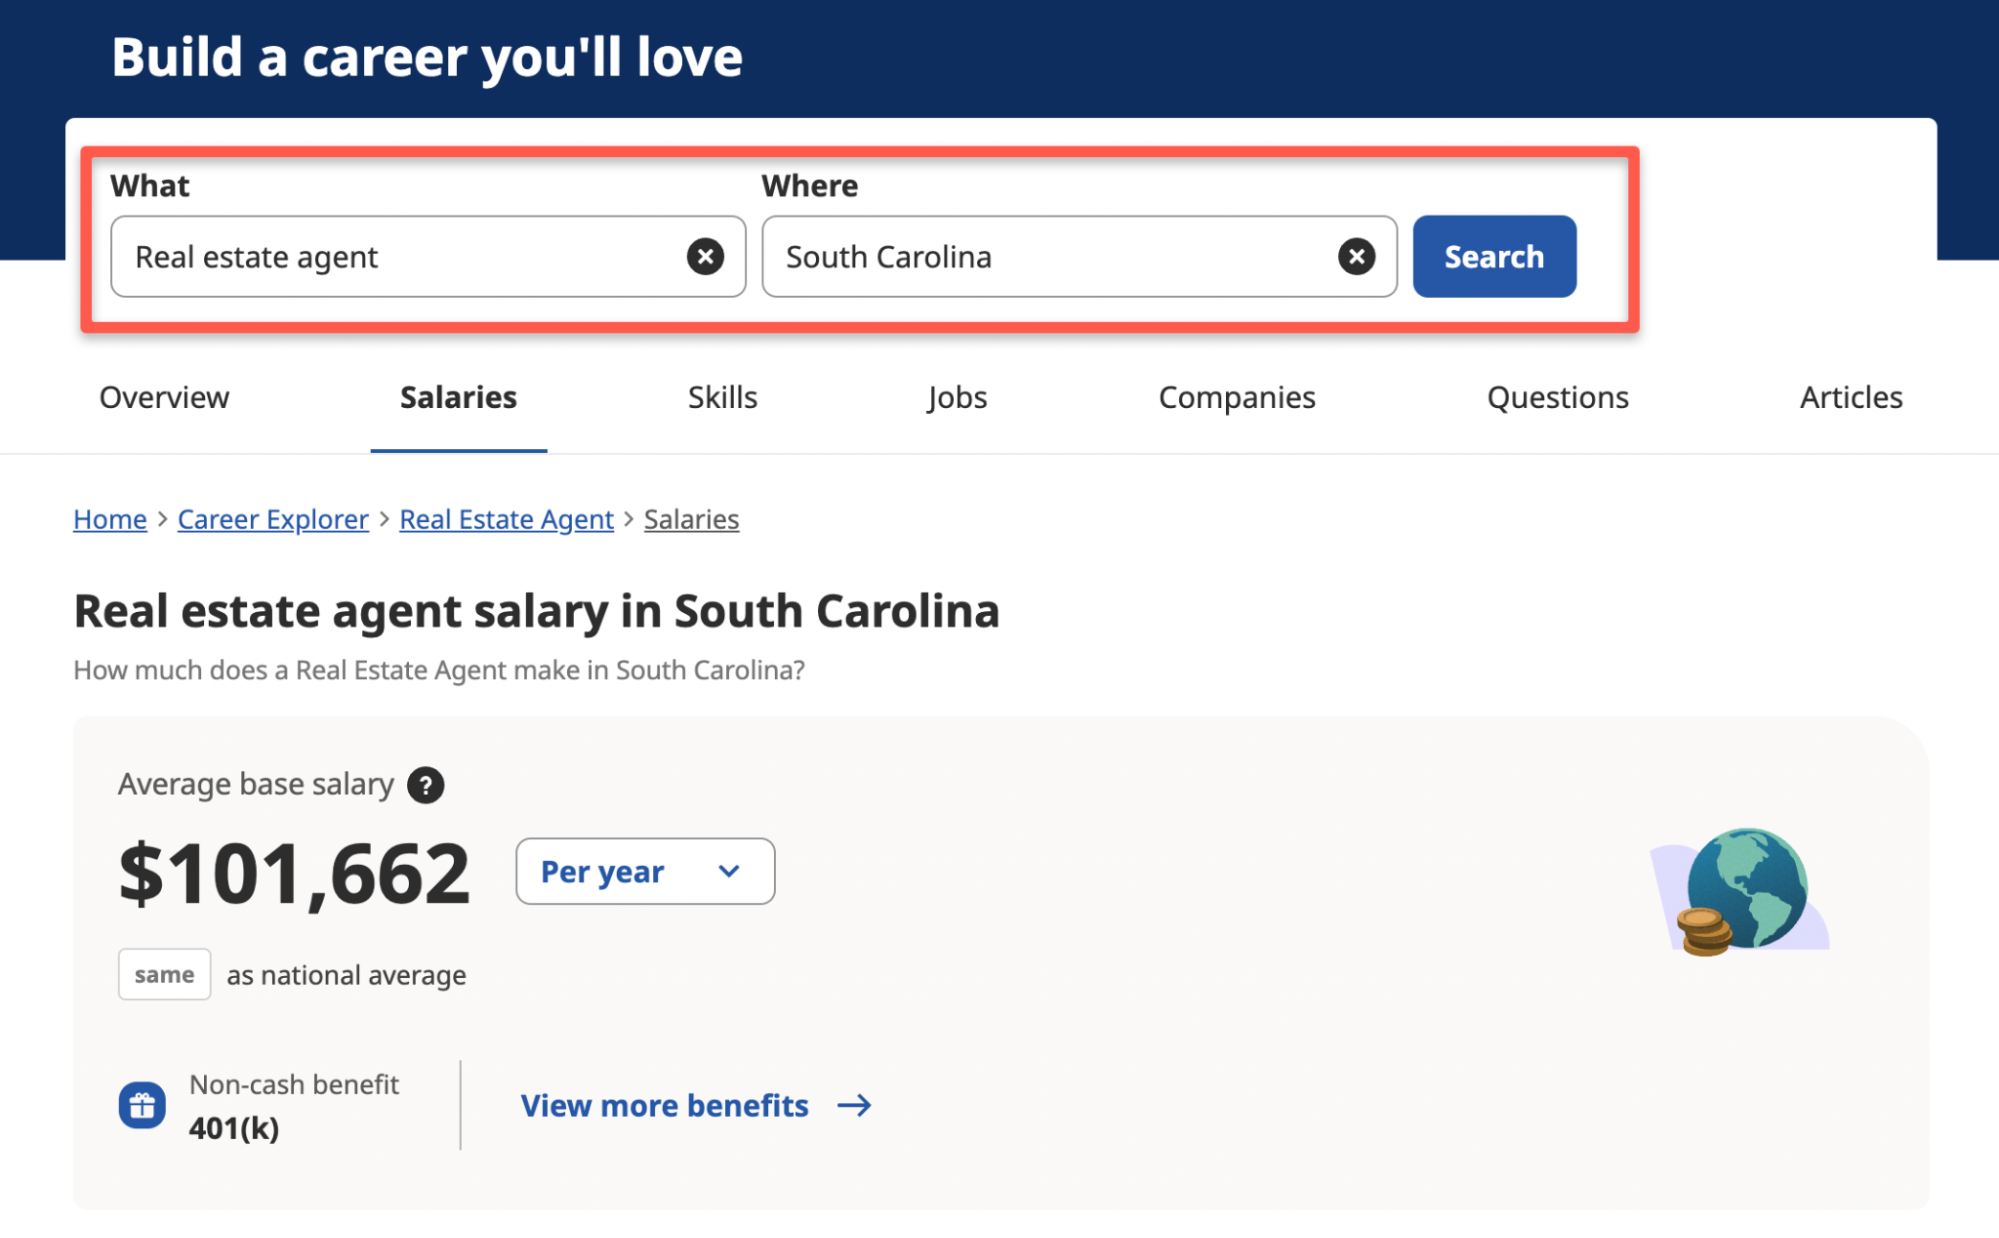 Salary information for real estate agents in South Carolina.